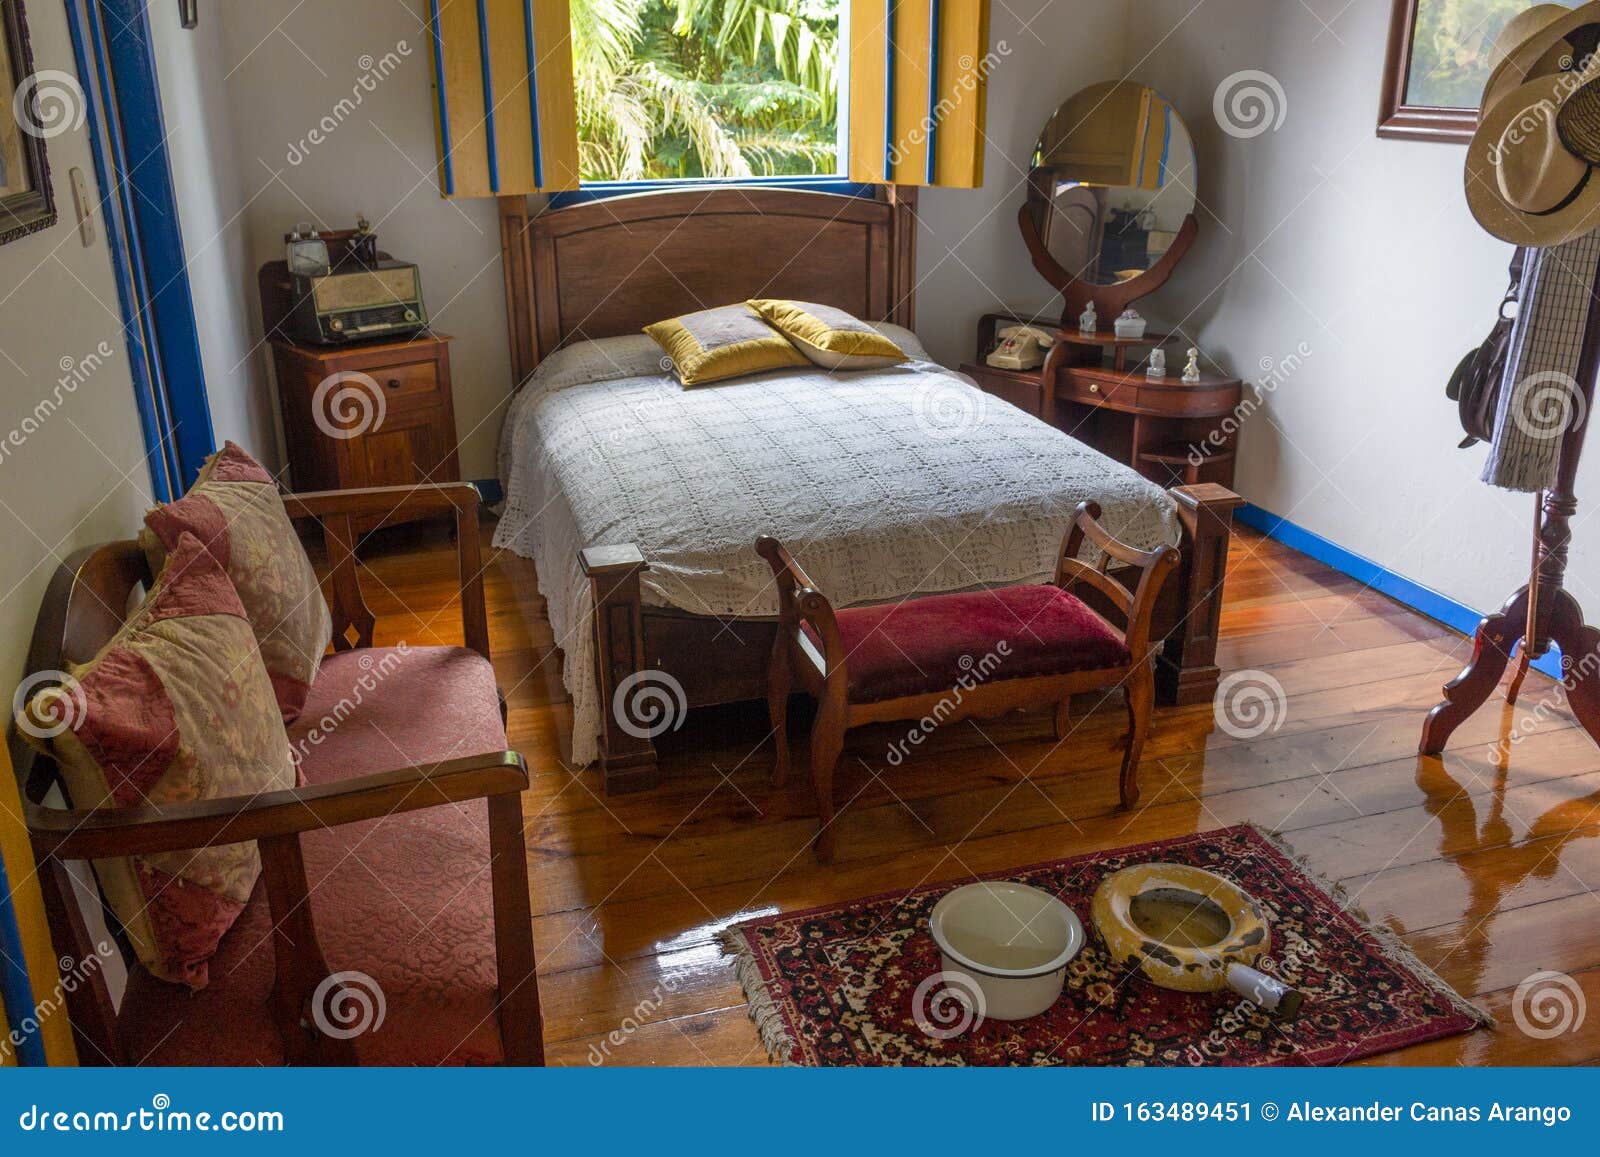 Old Colombian Bedroom Stock Image Image Of Hotel Home 163489451